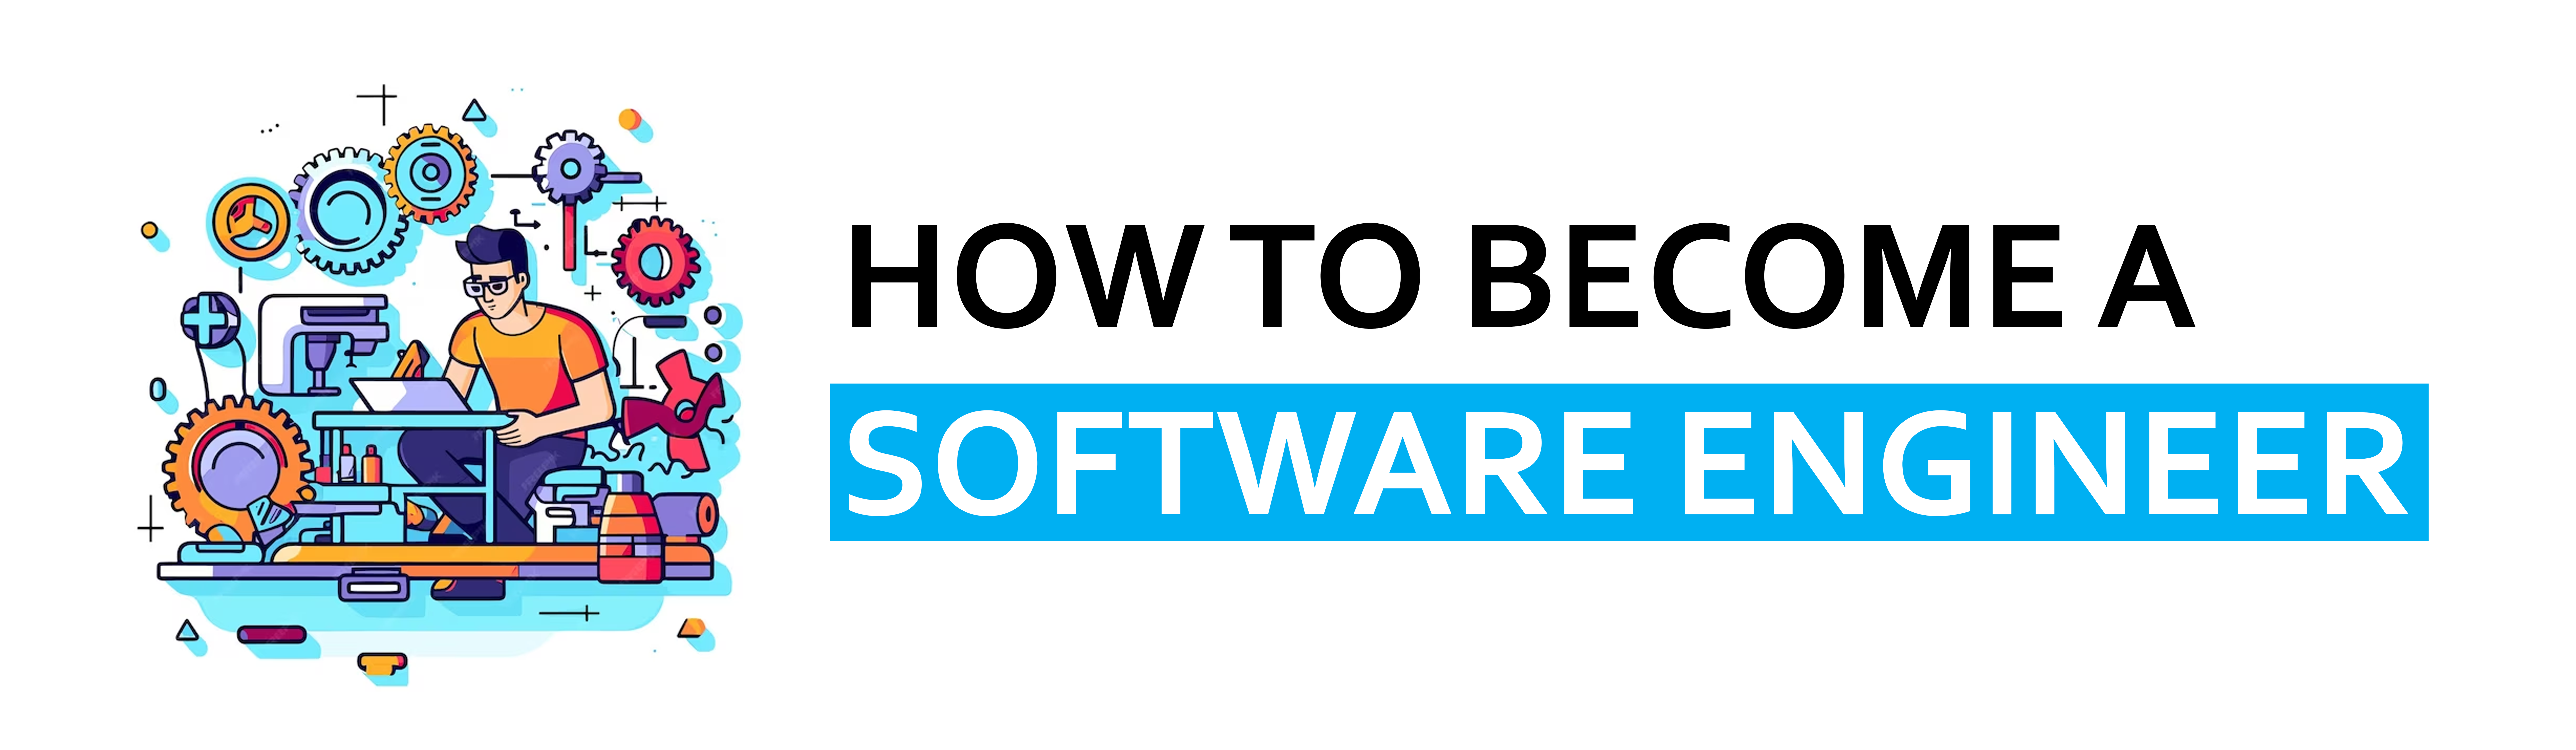 and image representing the concept How to Become a Software Engineer